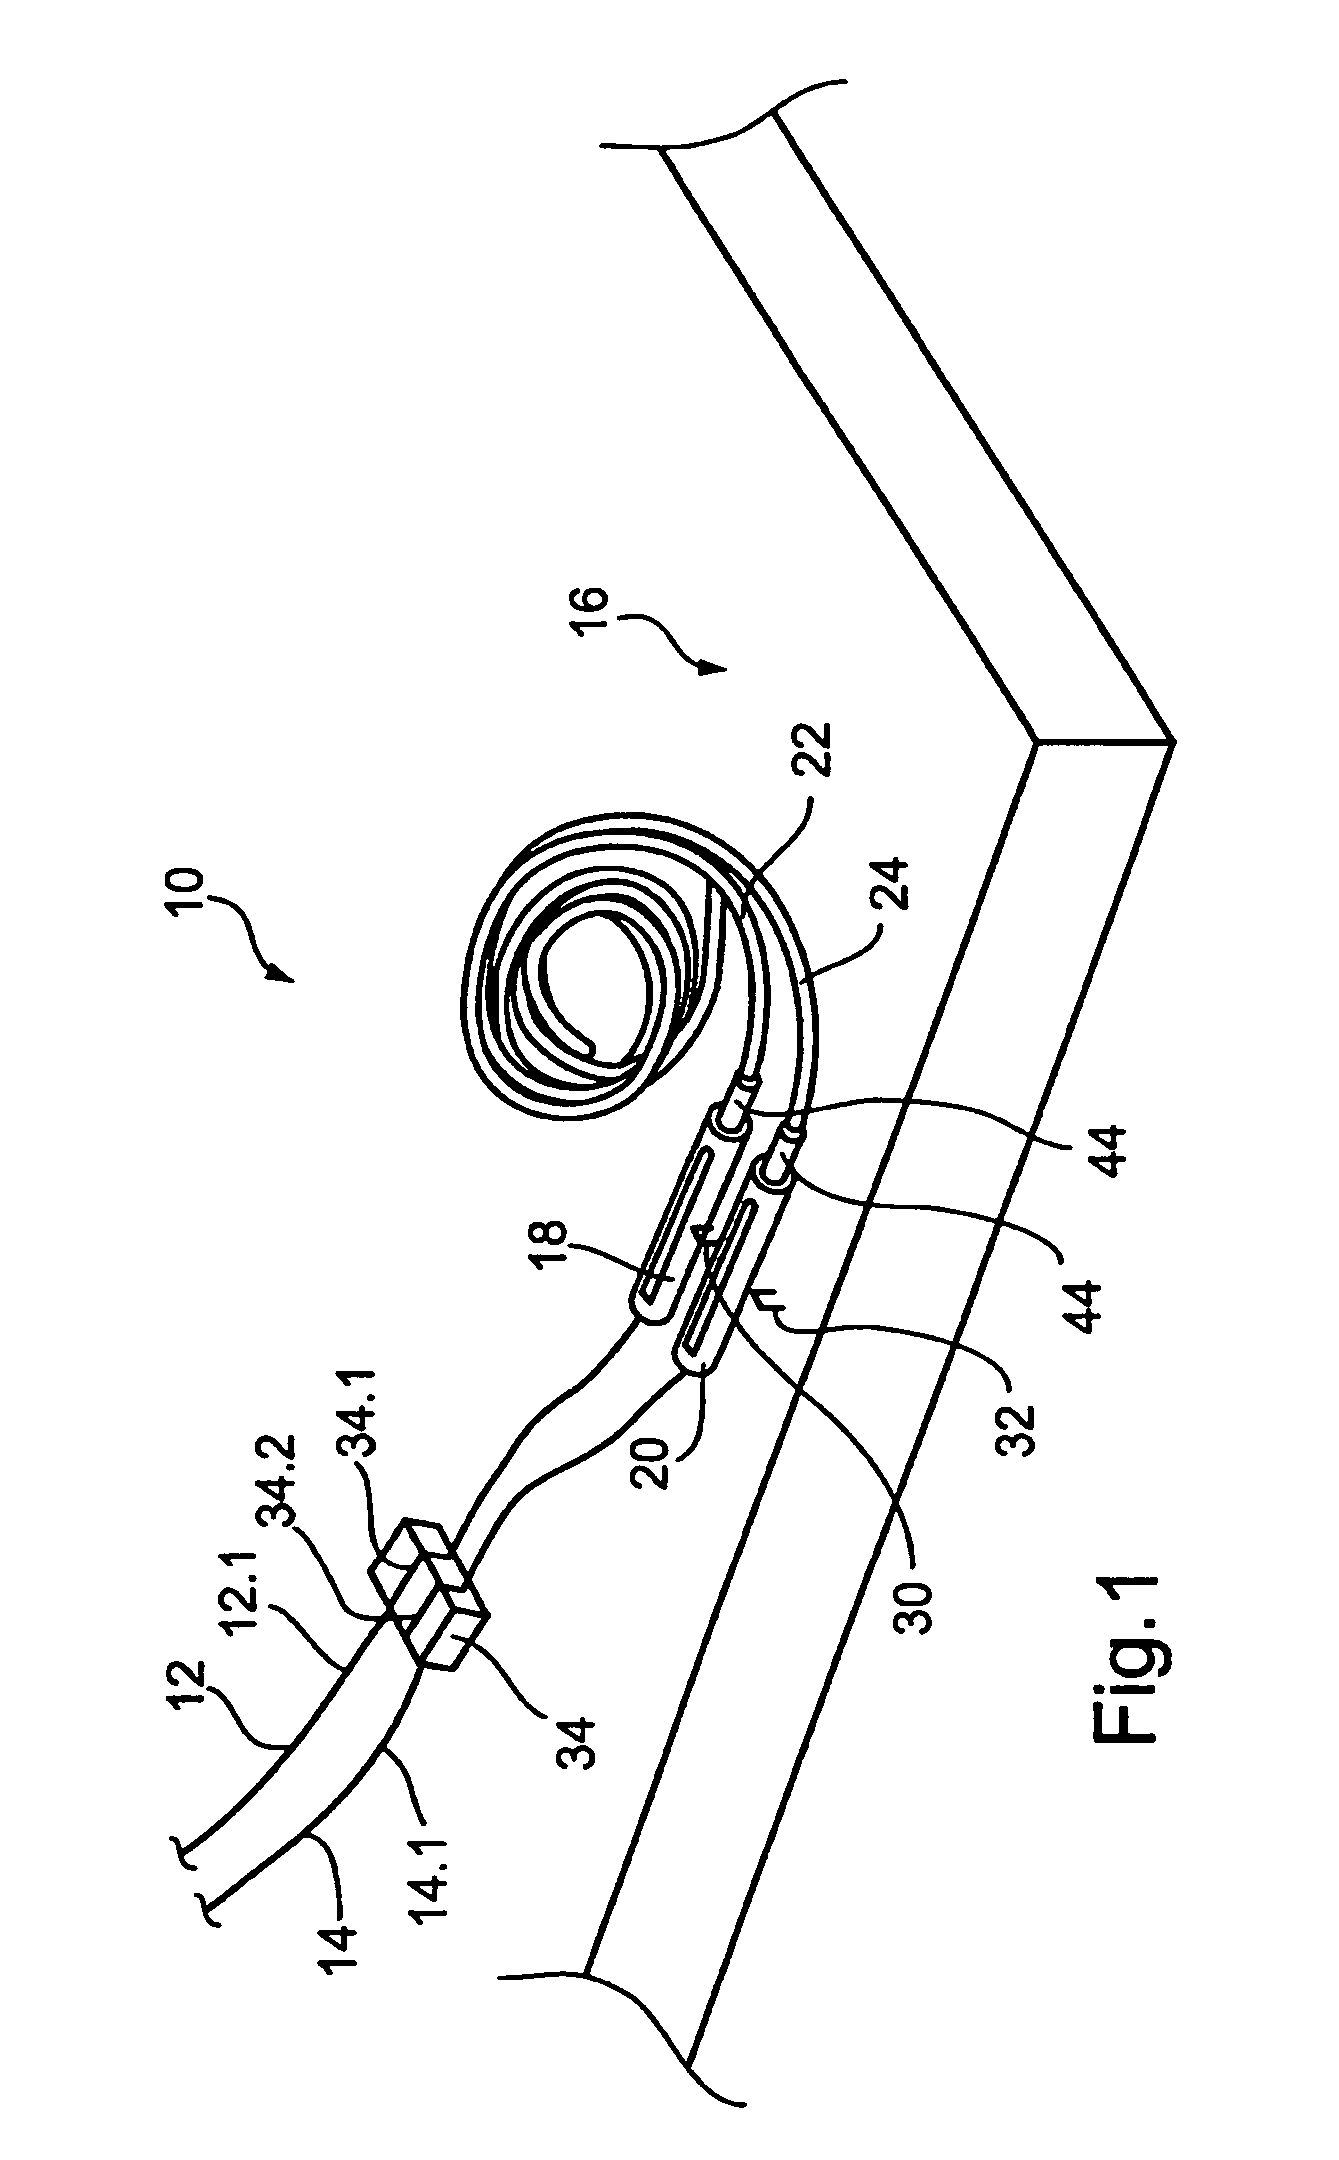 Guidewire management devices and methods